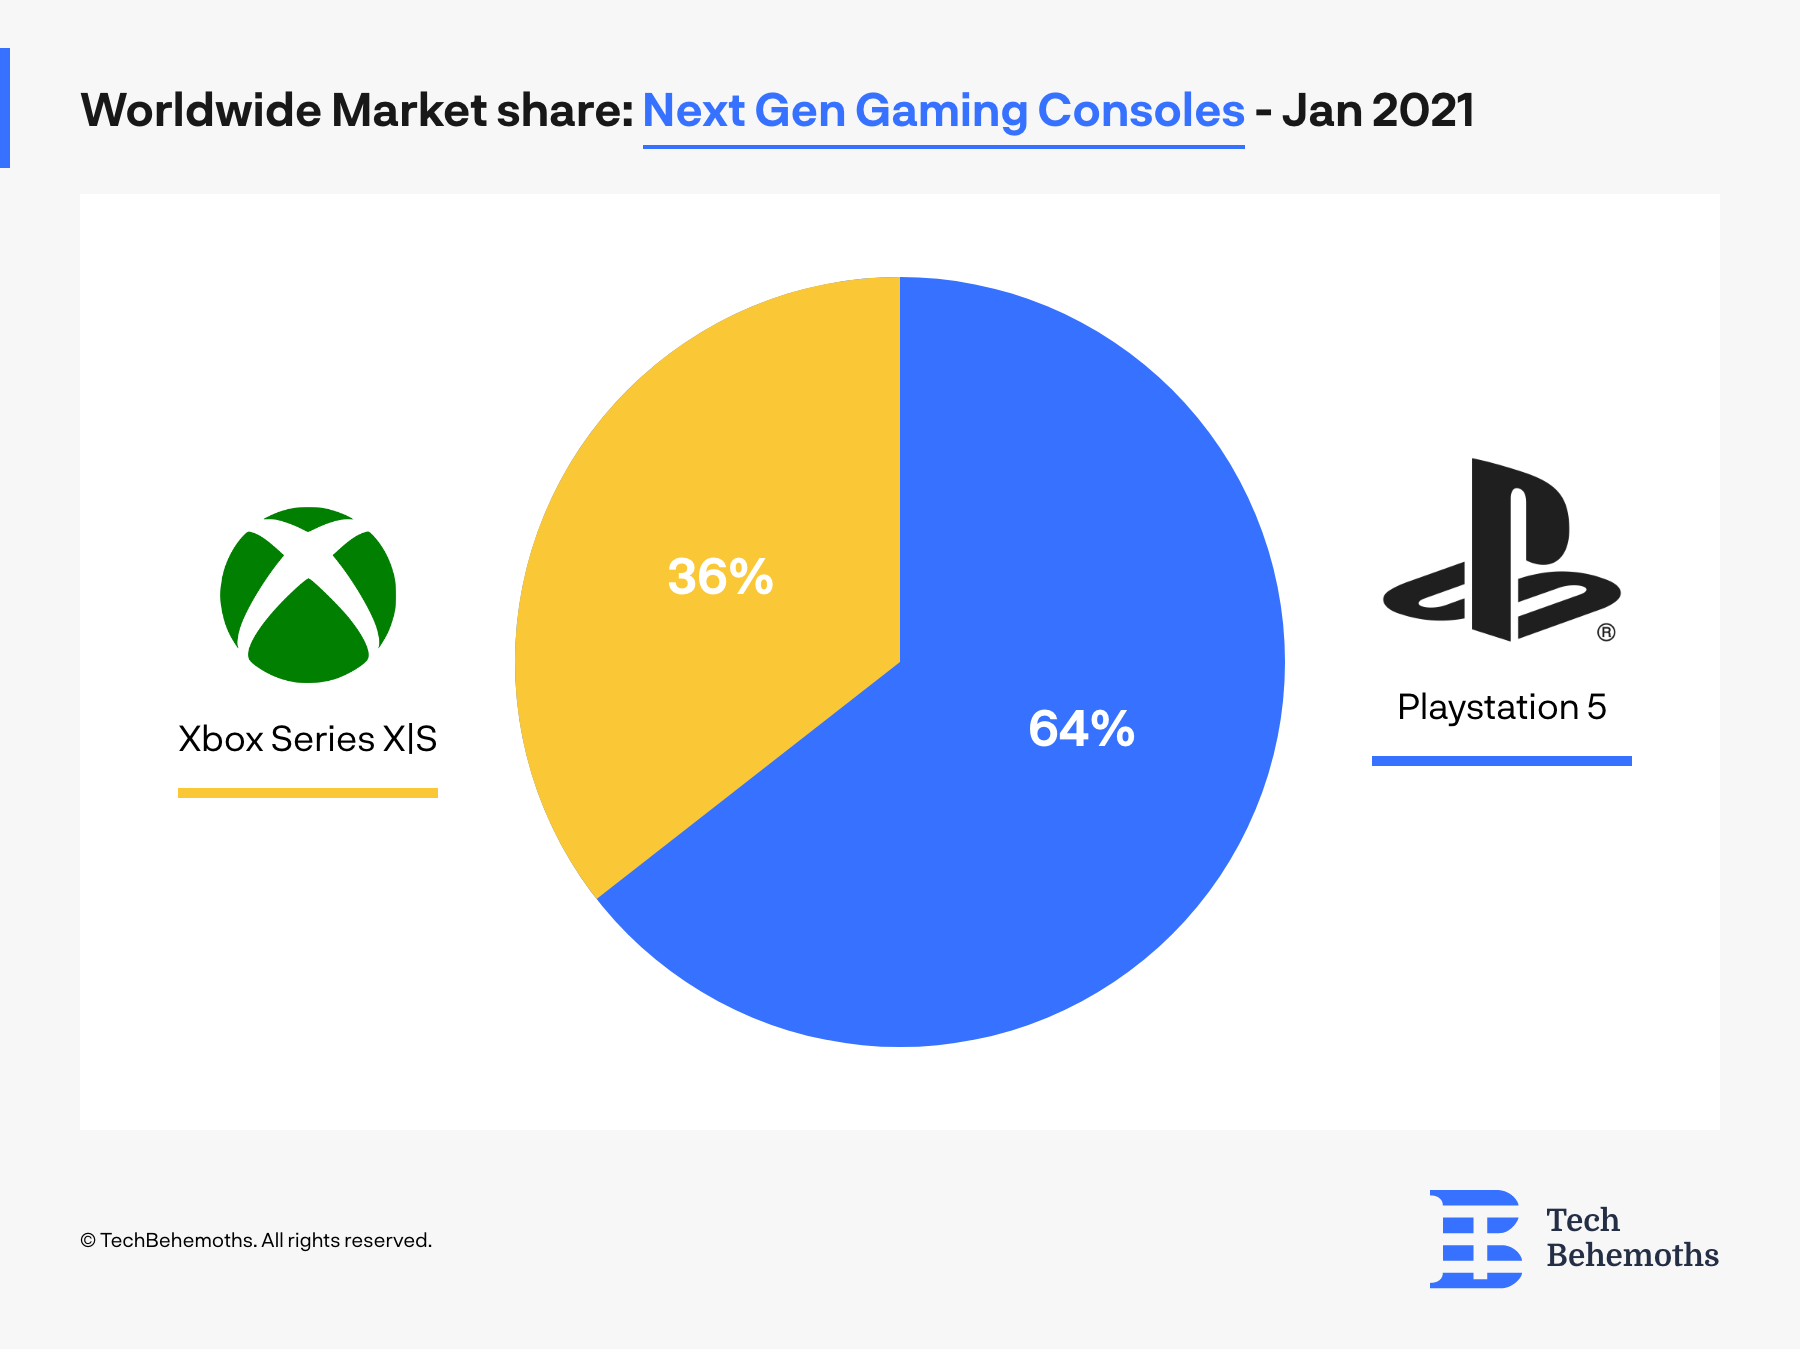 worldwide market share of next generation gaming consoles as of Januarry 2021